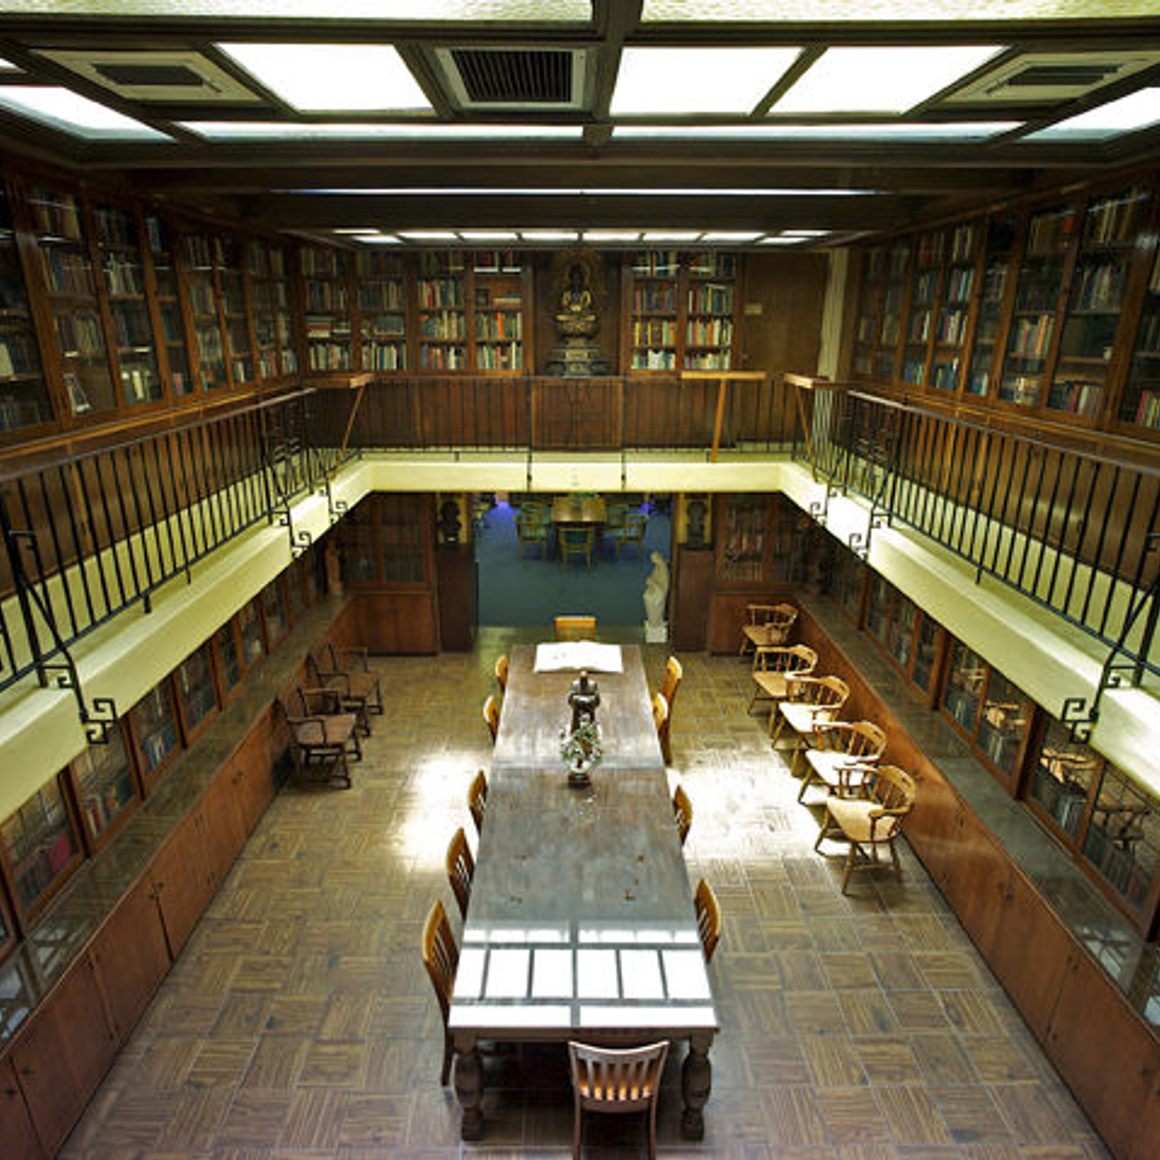 The Philosophical Research Society Library.